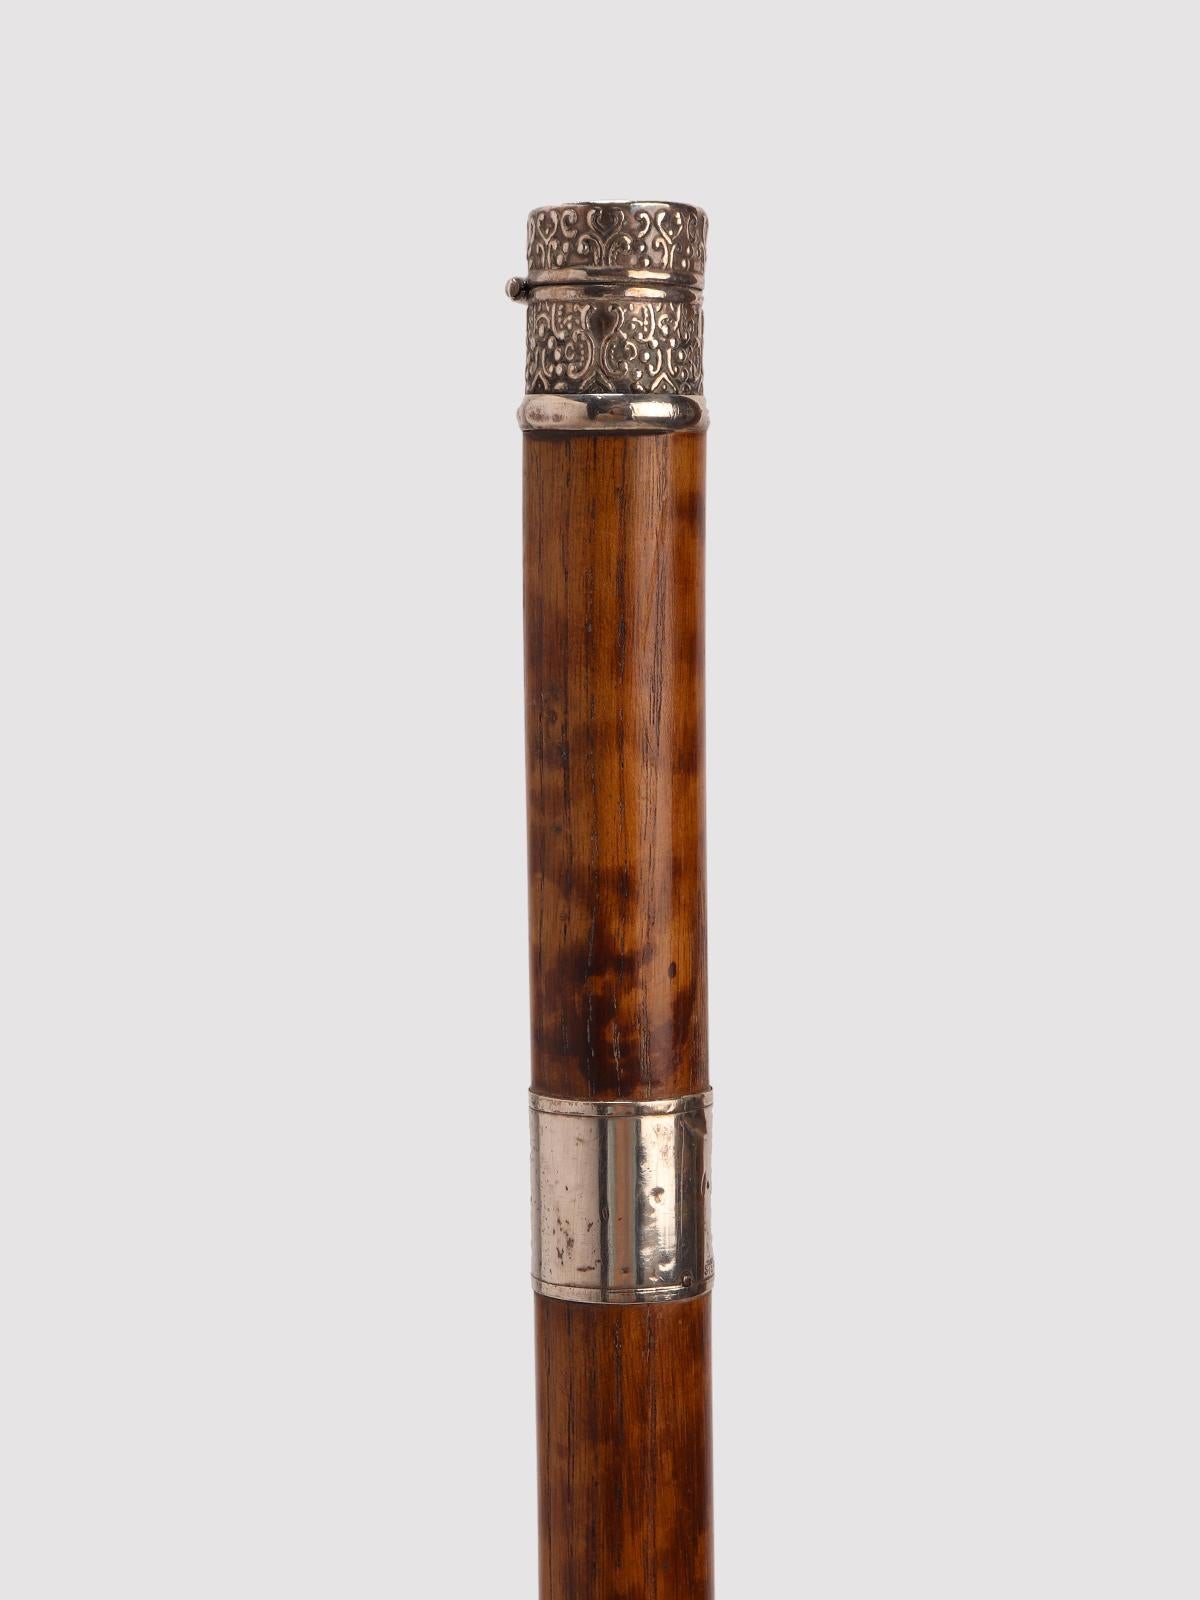 System walking stick, flamed fruit wood barrel, with 925/1000 sterling silver knob and band, acting as a container for a sewing thimble. Brass tip. United States of America early 20th century.